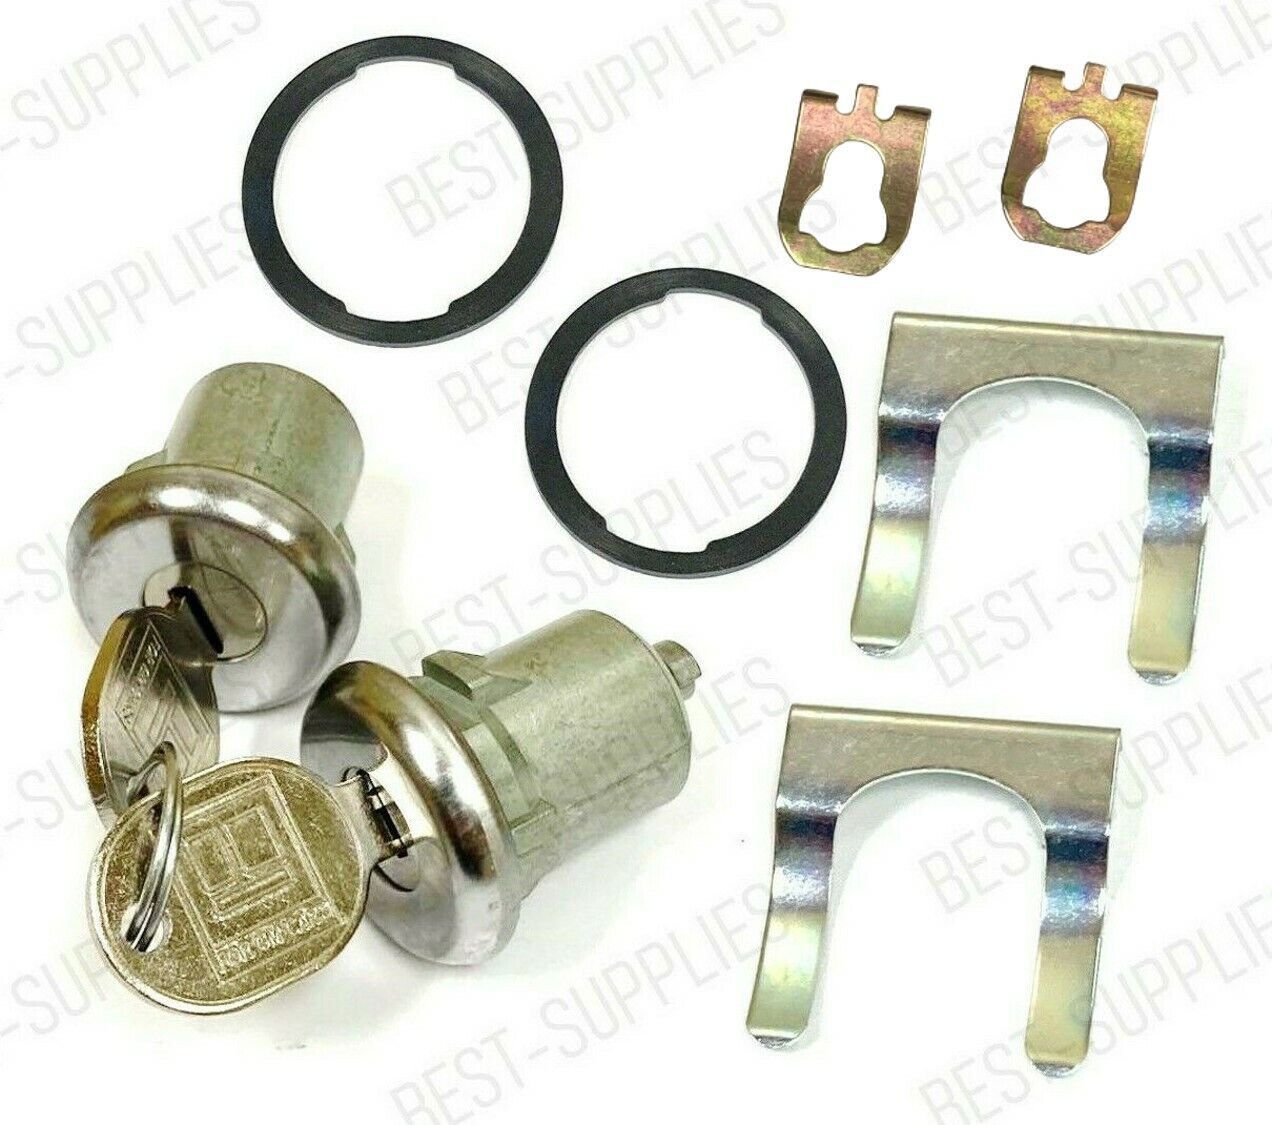 NEW Lockcraft Silver Door Lock Cylinder PAIR / FOR LISTED CHEVROLET TRUCK & SUV